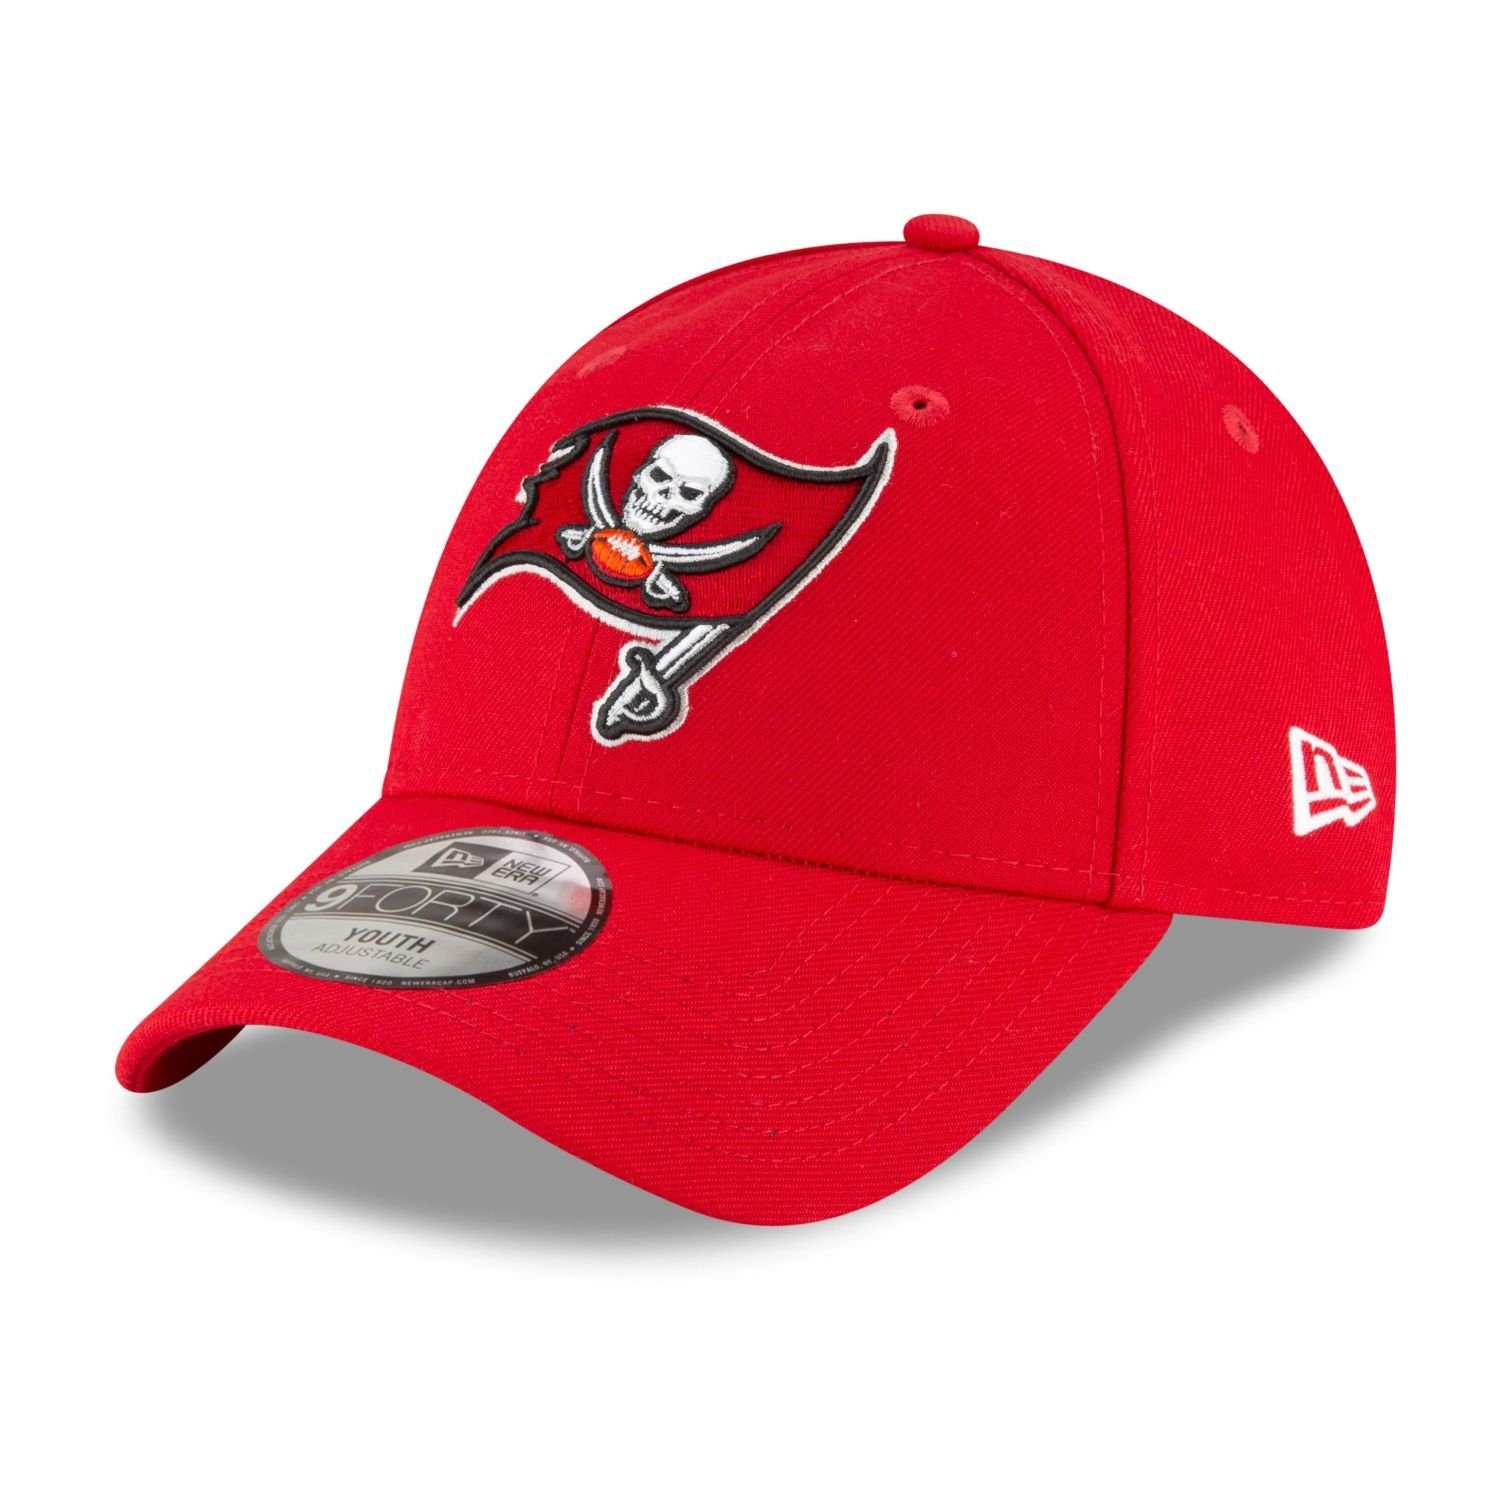 New Era Baseball Cap 9Forty Youth LEAGUE Tampa Bay Buccaneers